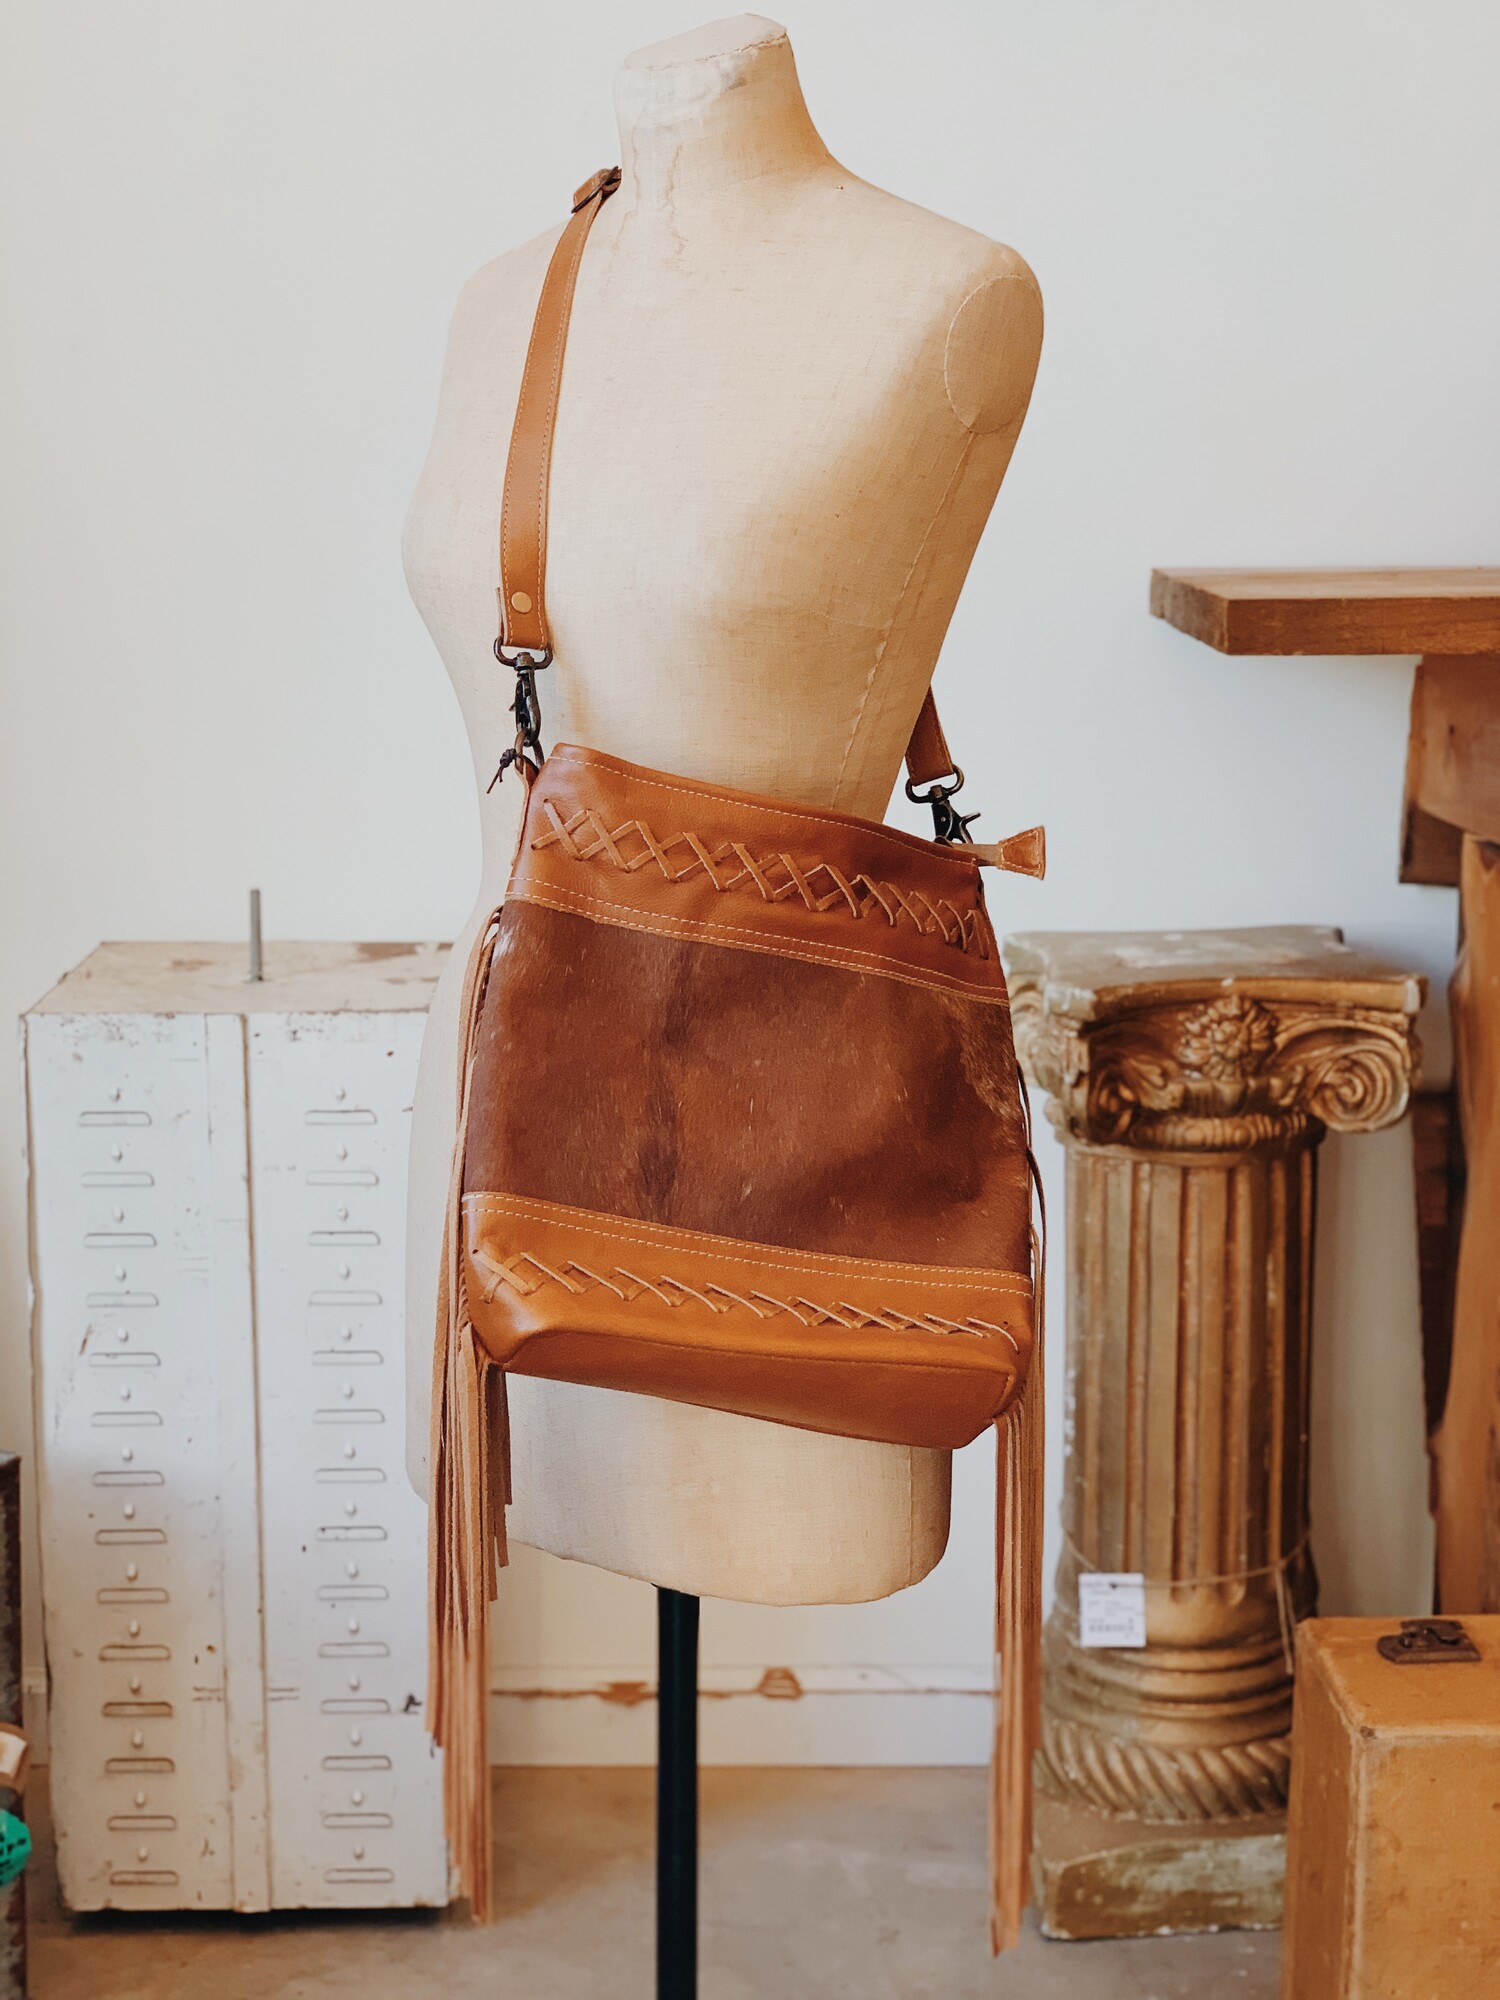 Myra purses are made from quality leather and cowhide! This purse is fabric lined and three inside pockets, as well as one outside pocket!
Measurements: 12 inches tall, 13 inches wide, 3 inches deep